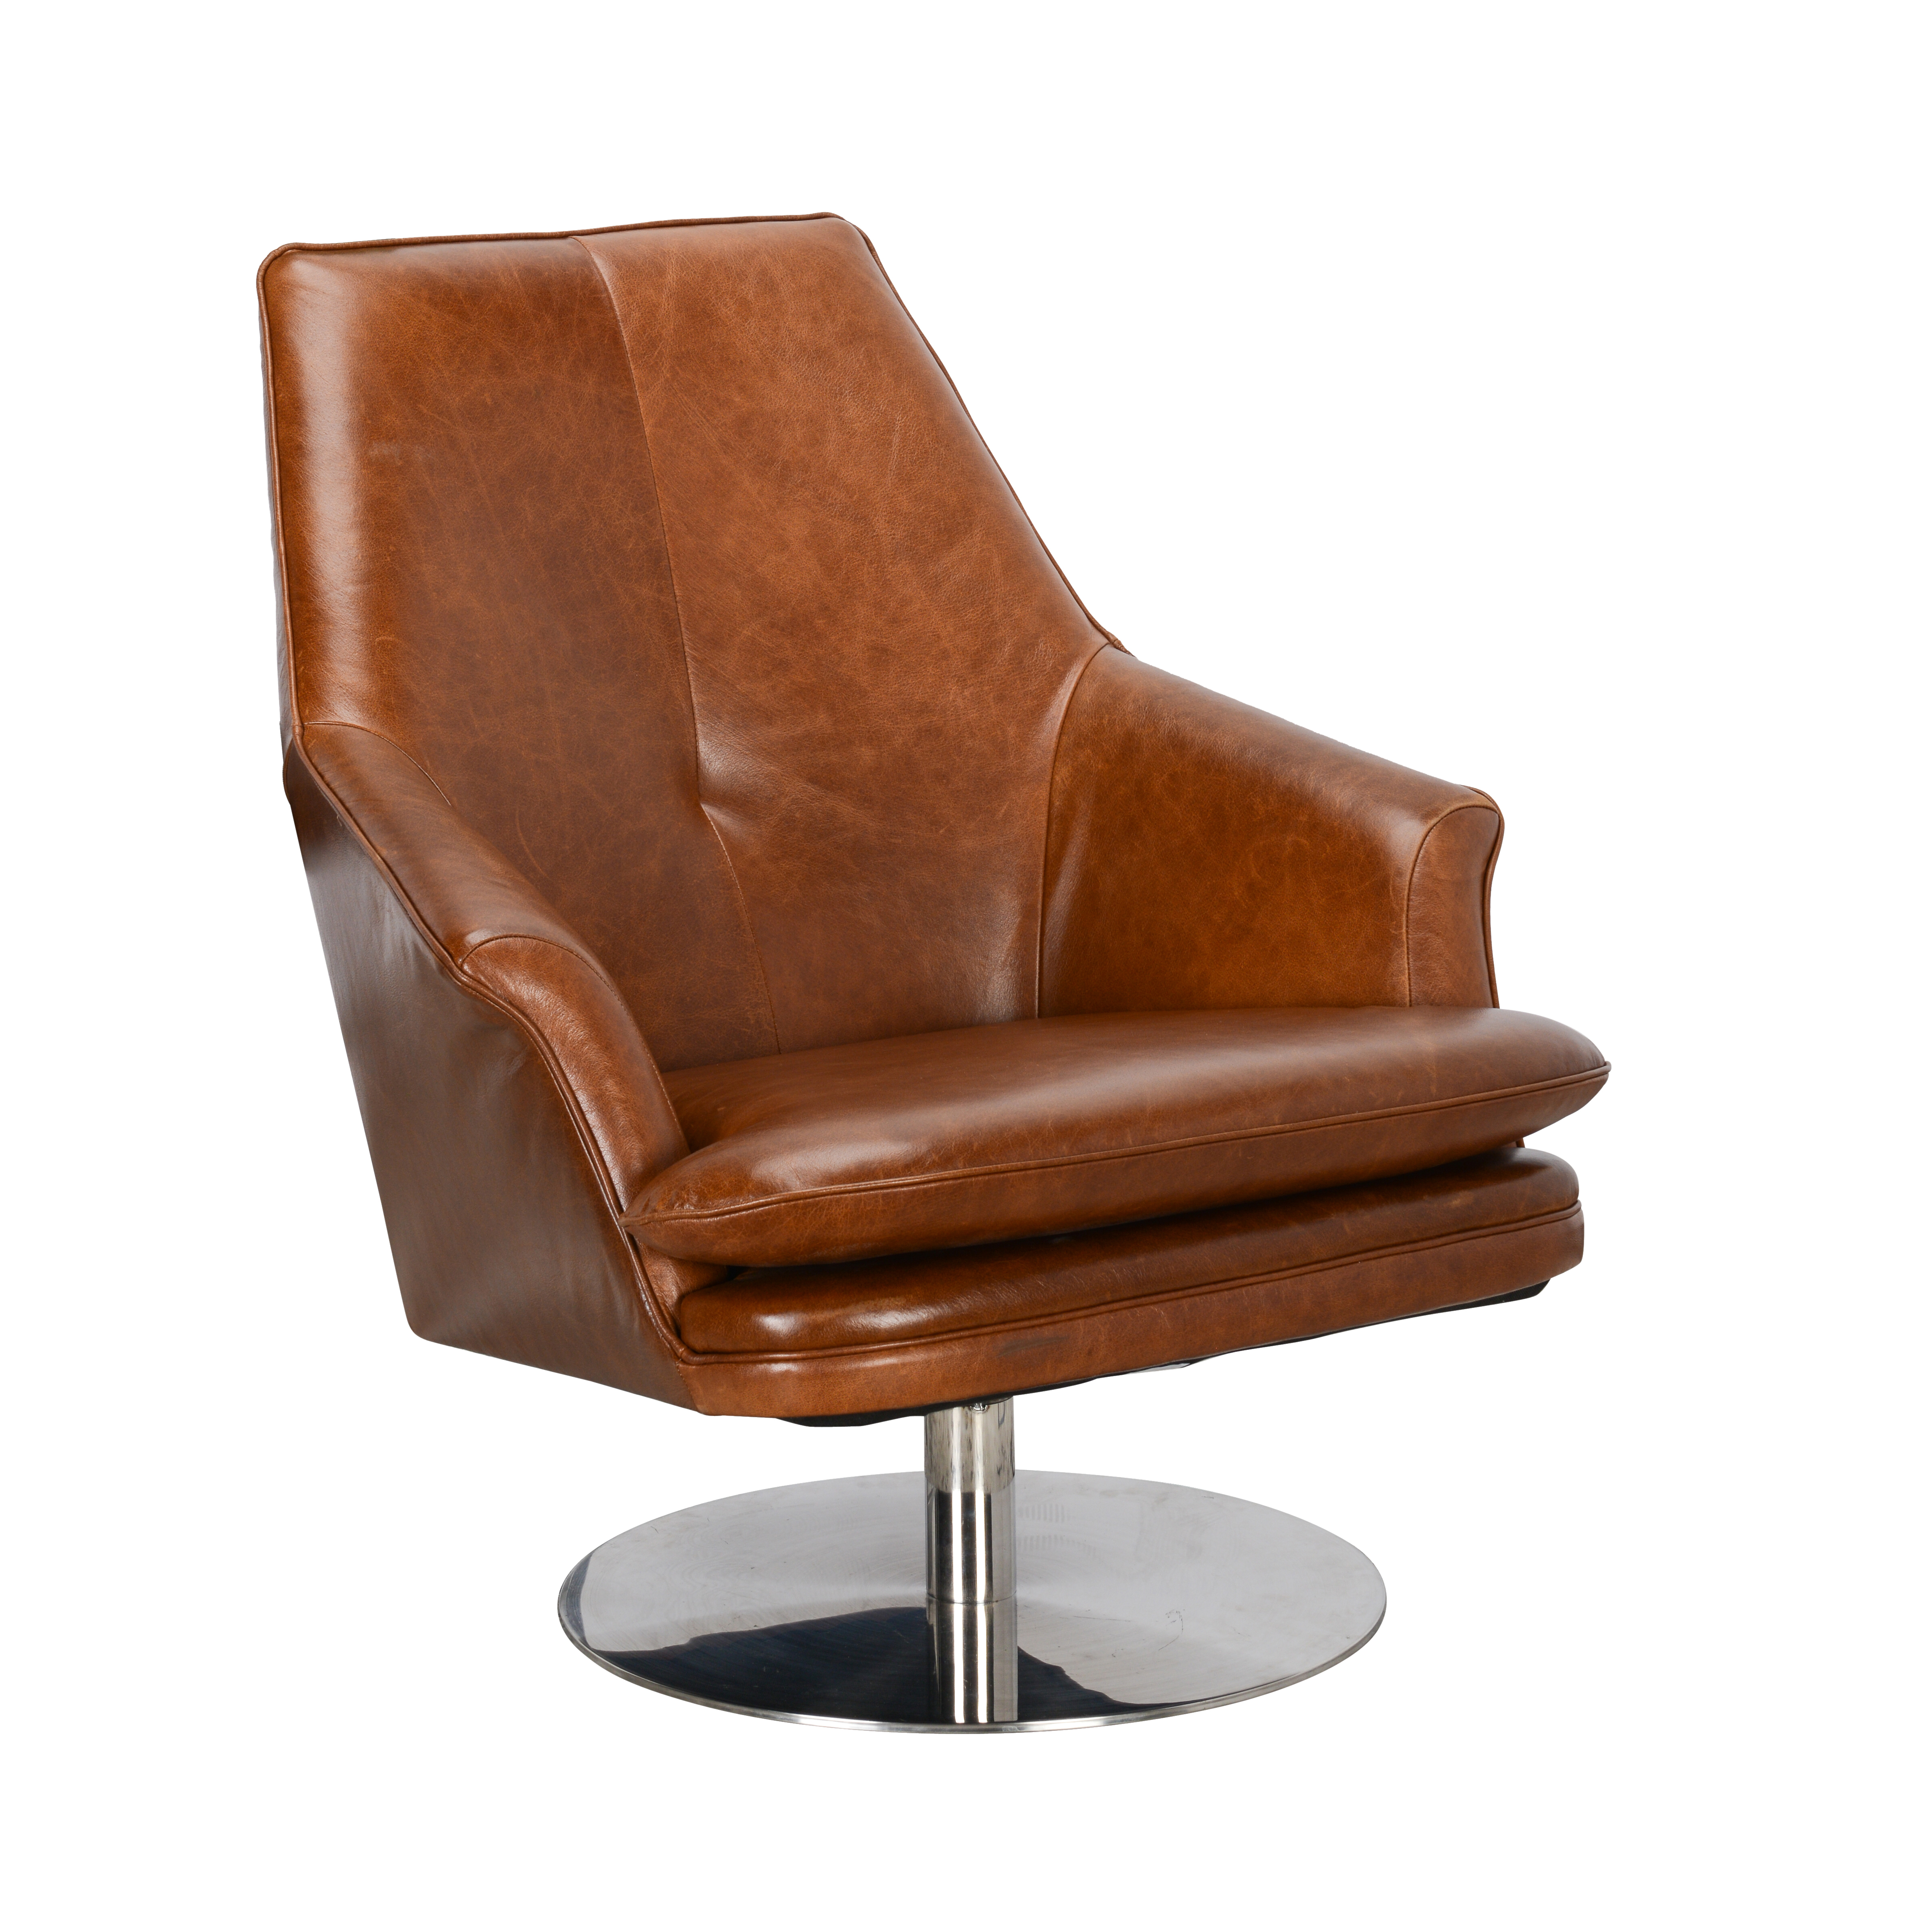 Classic Home Irving swivel chair